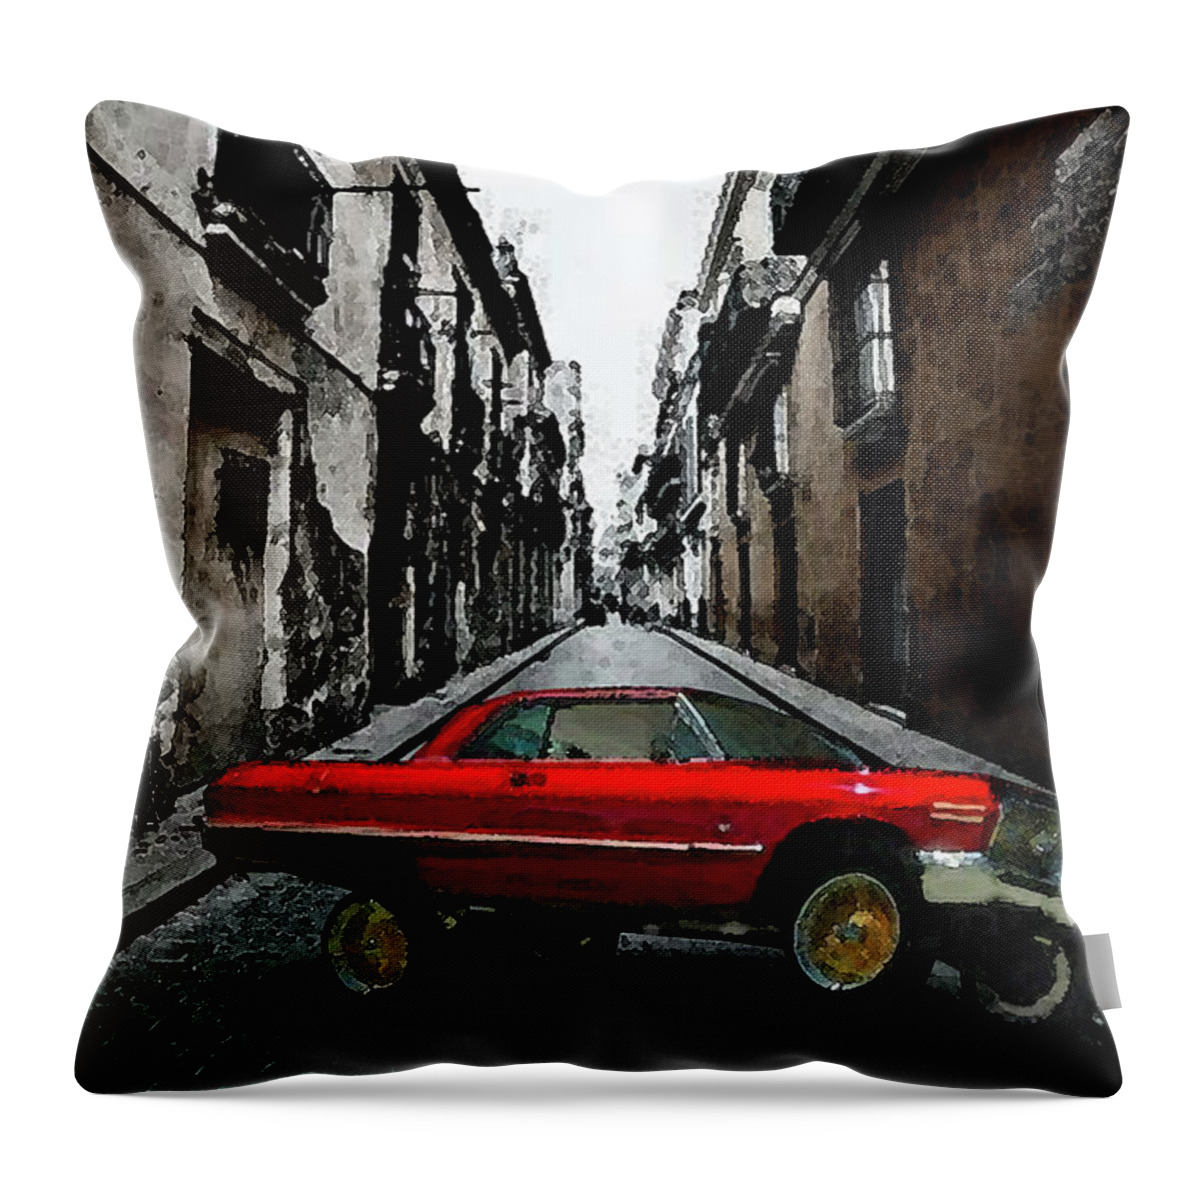 Lowrider Throw Pillow featuring the digital art Low Rider by Monday Beam